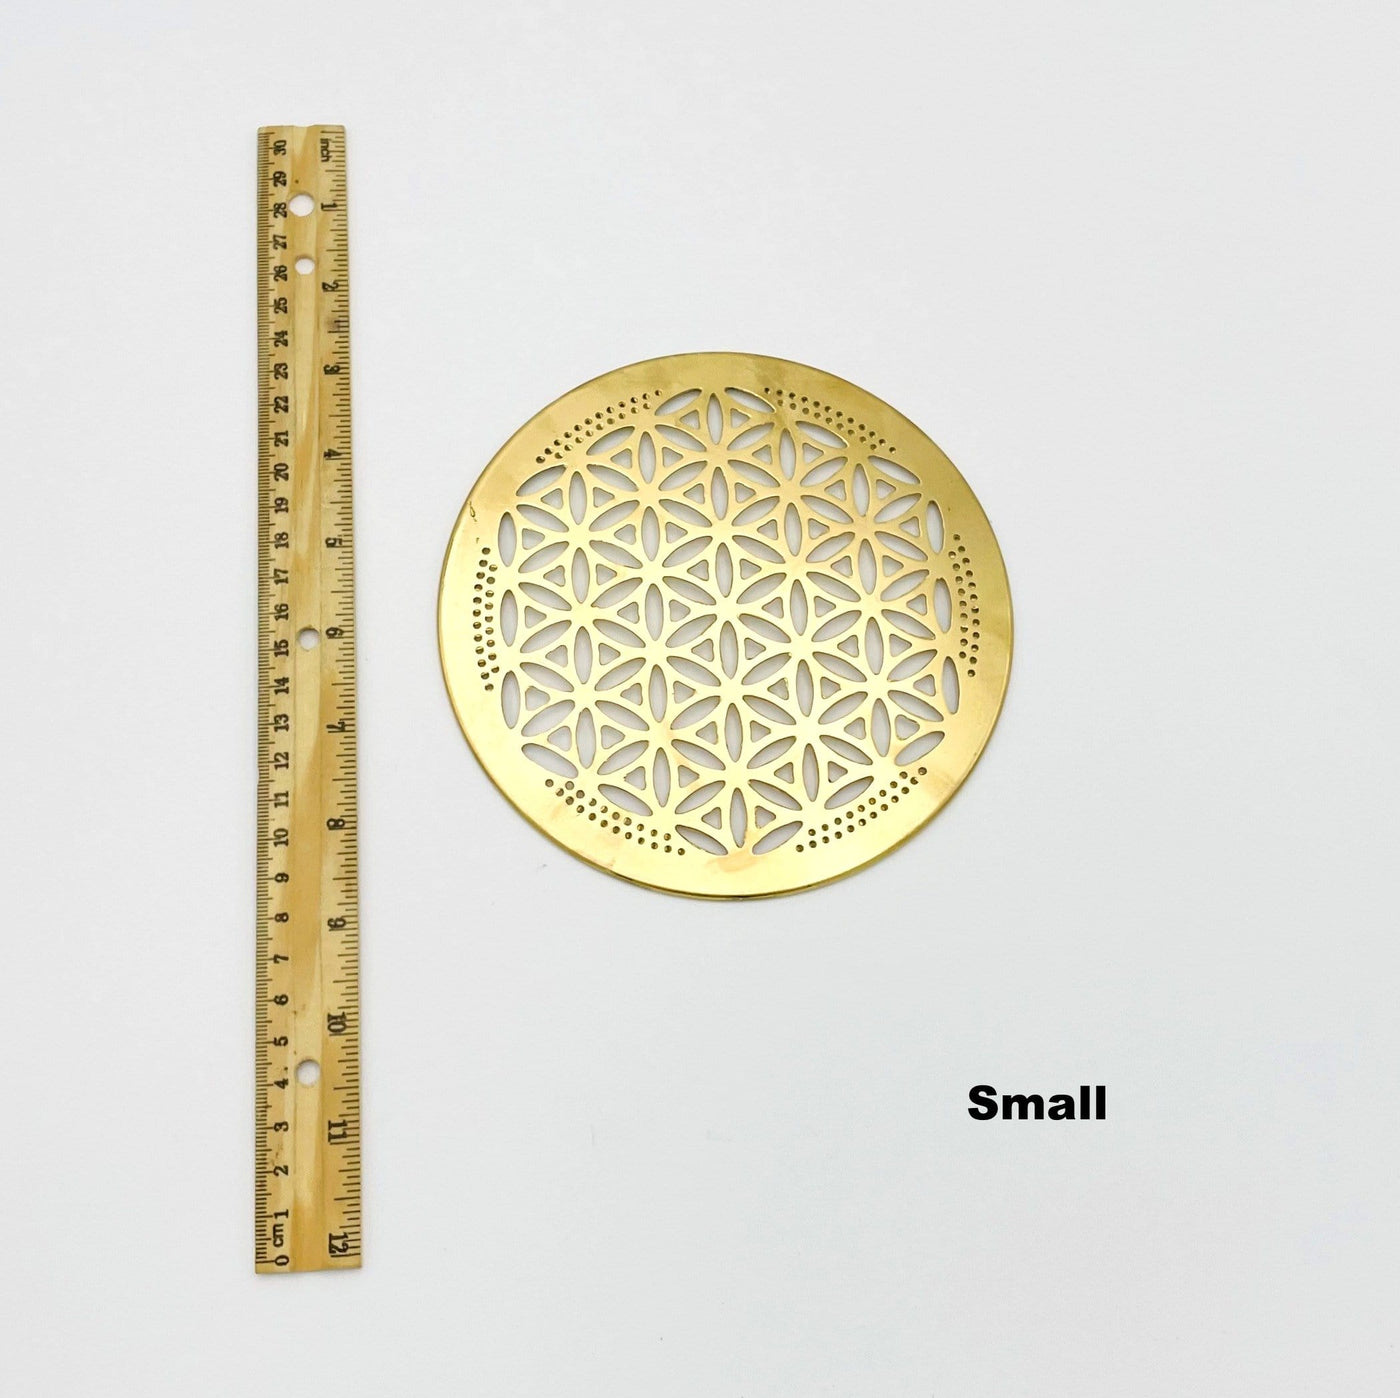 flower of life grid available in small size. displayed next to a ruler for size reference